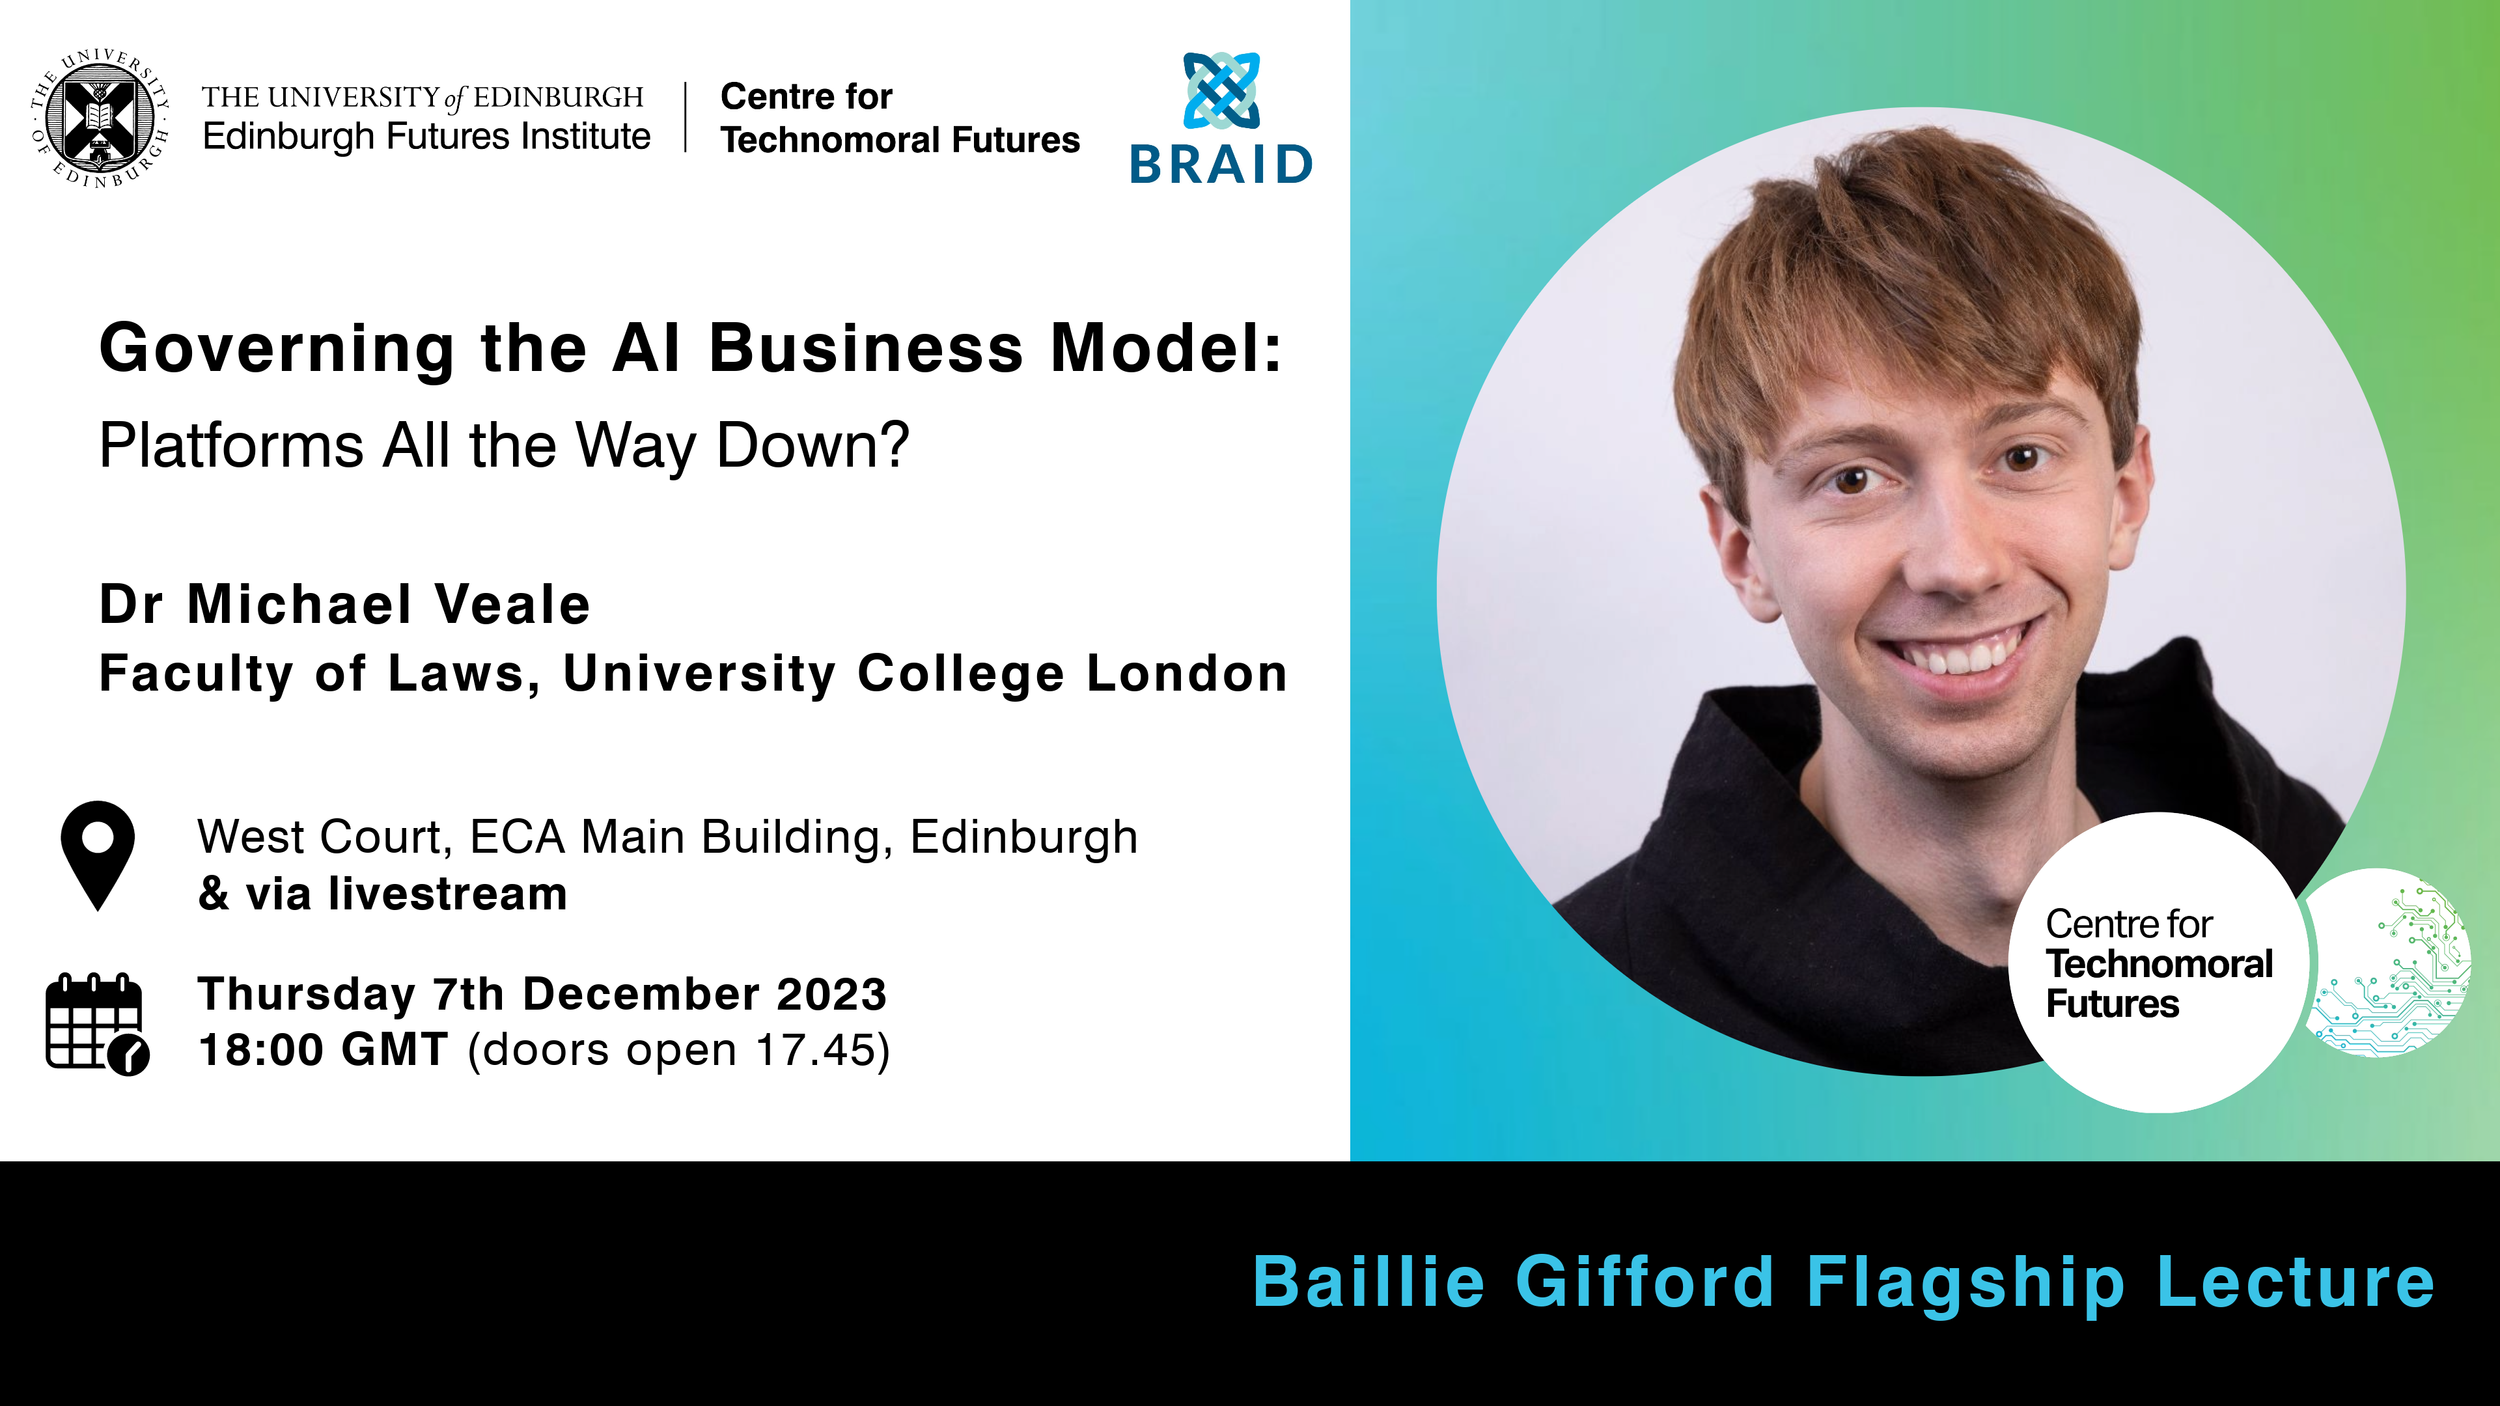 Baillie Gifford Flagship Lecture with Michael Veale